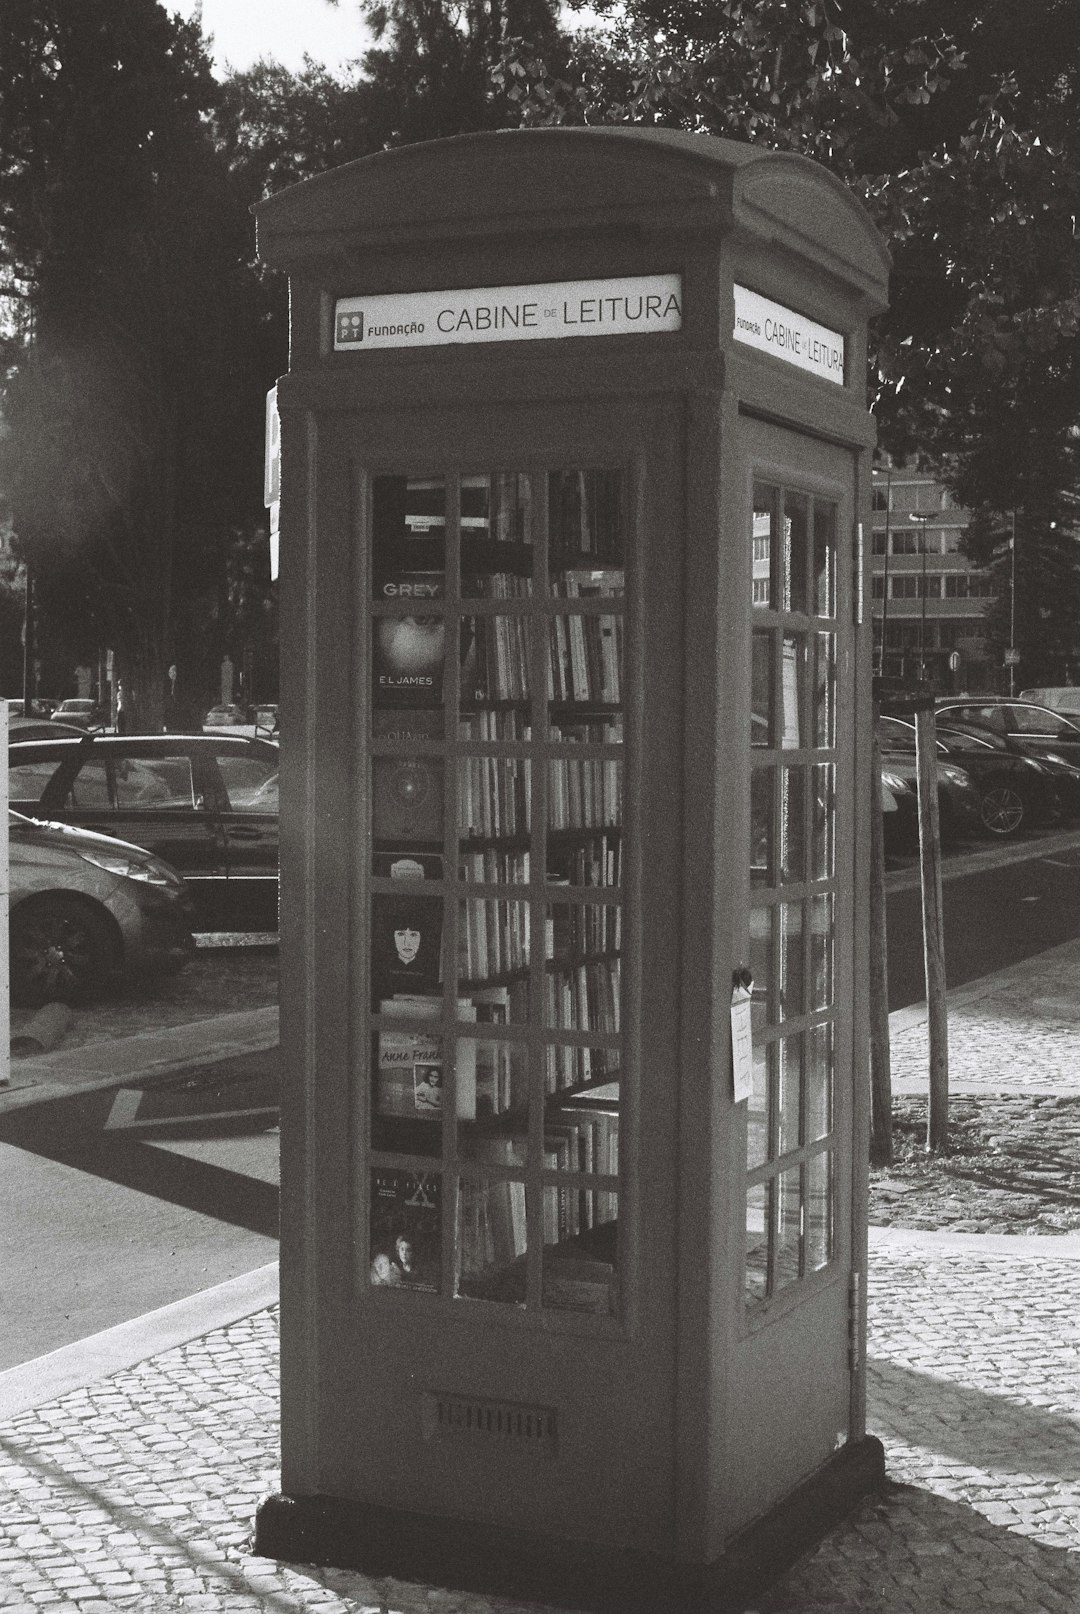 grayscale photo of telephone booth near road